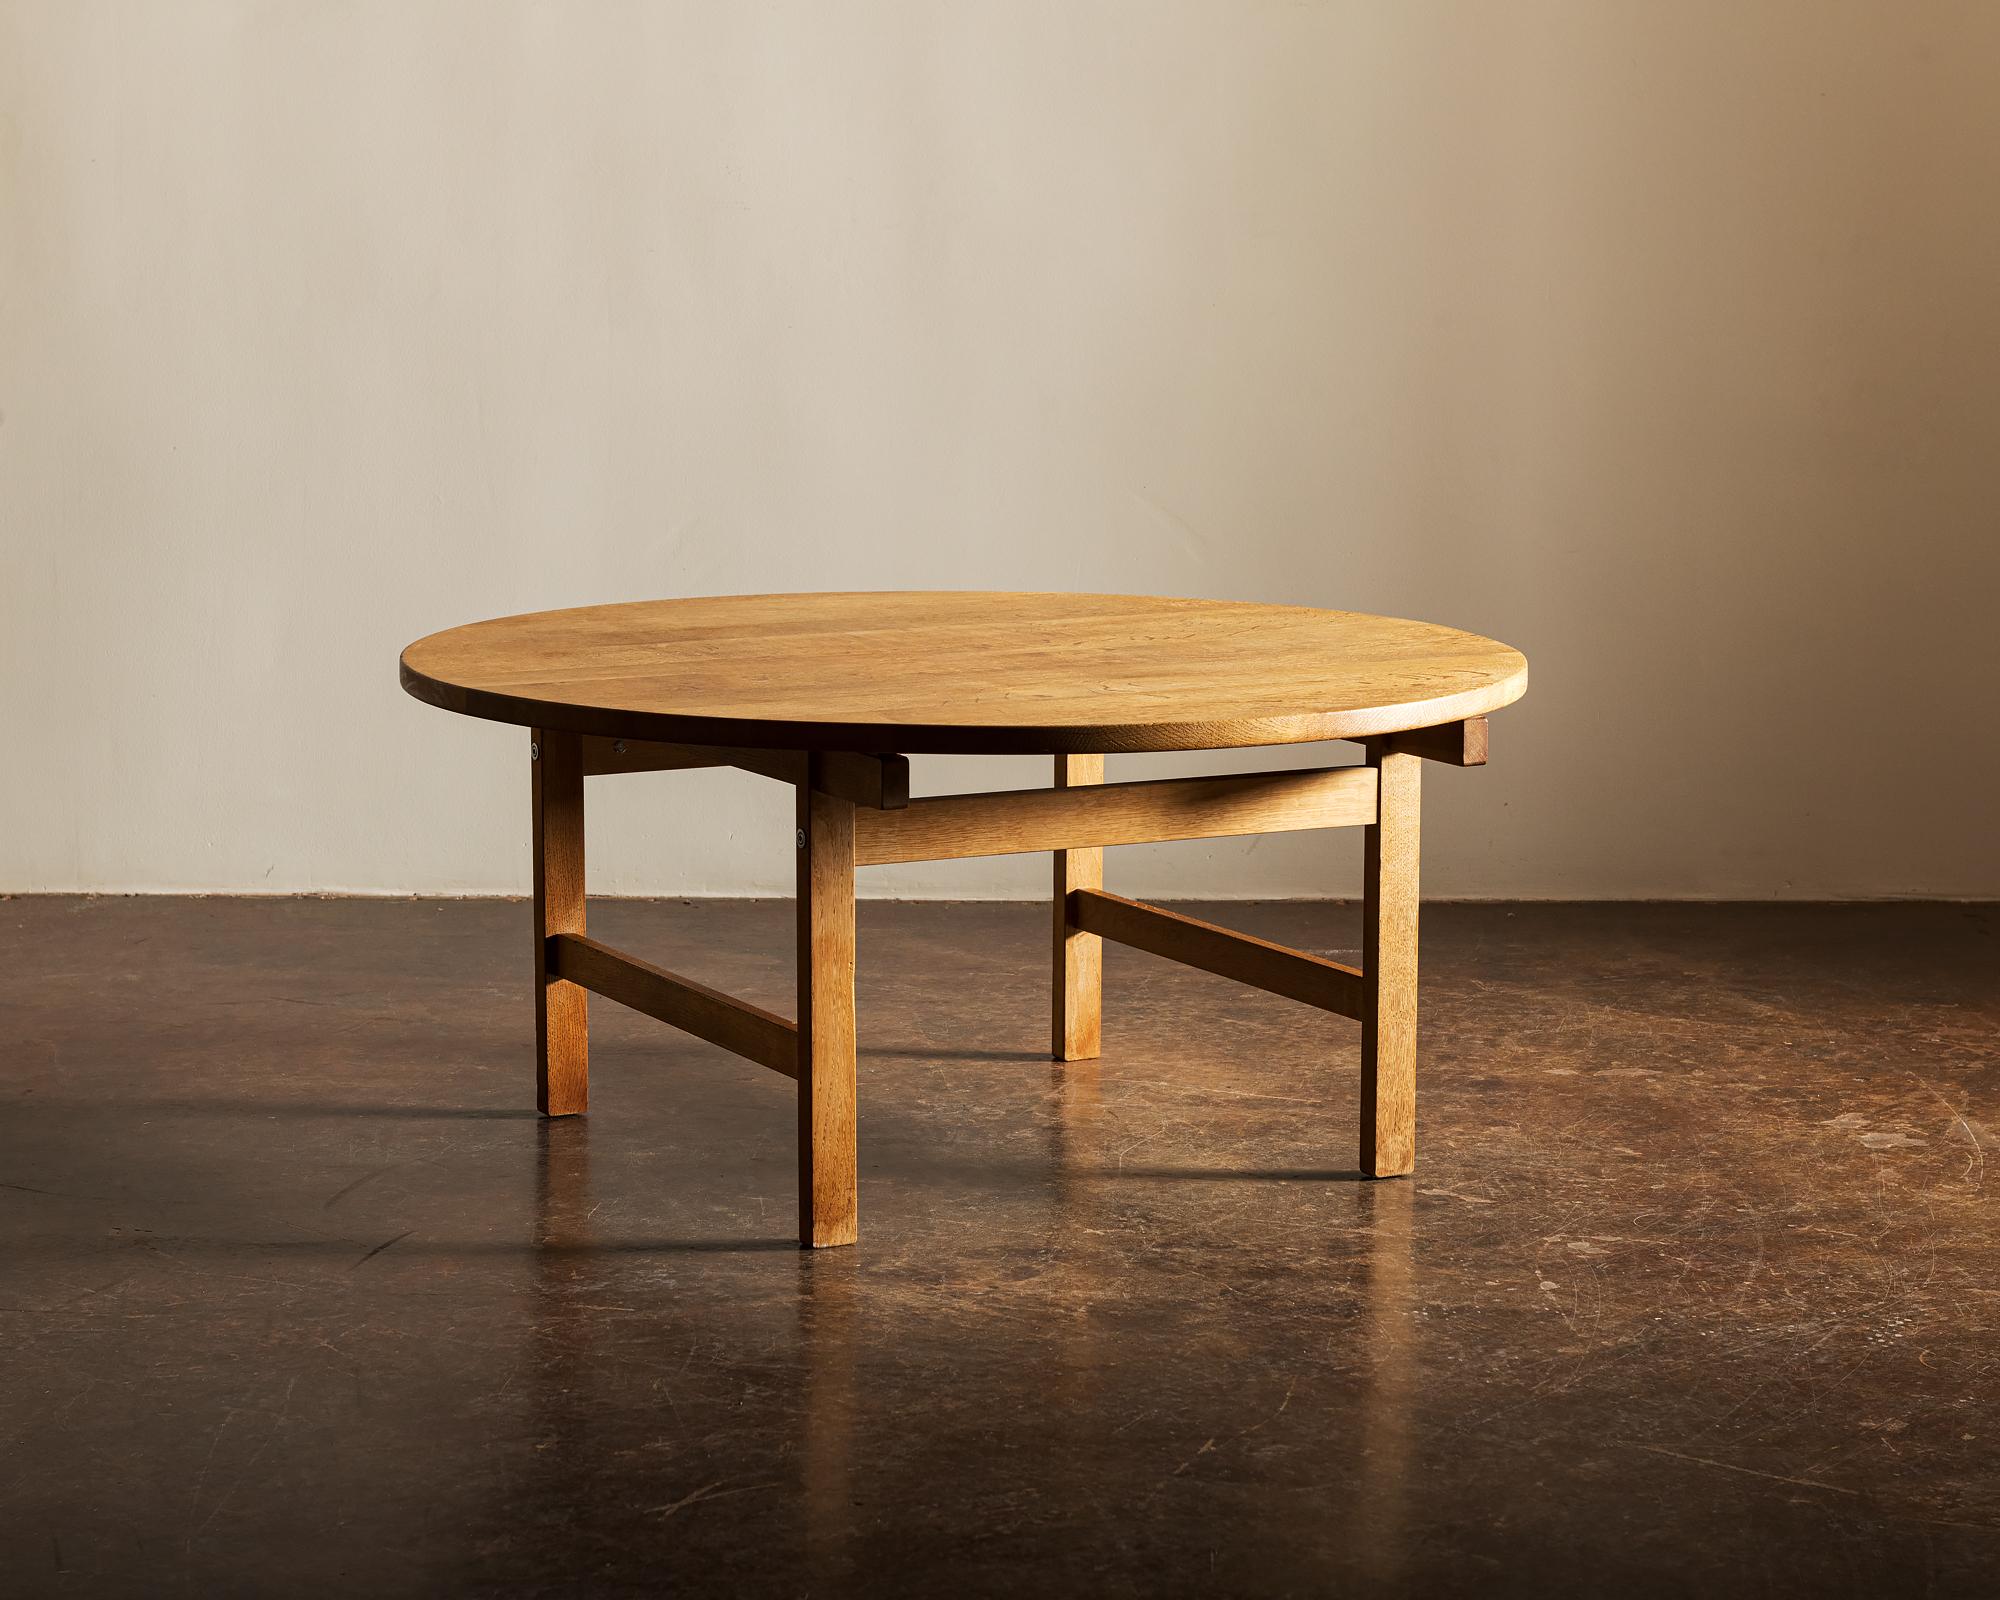 A handsome round coffee table by Wegner for Andreas Tuck in oak with a golden patina. Denmark, 1960s.